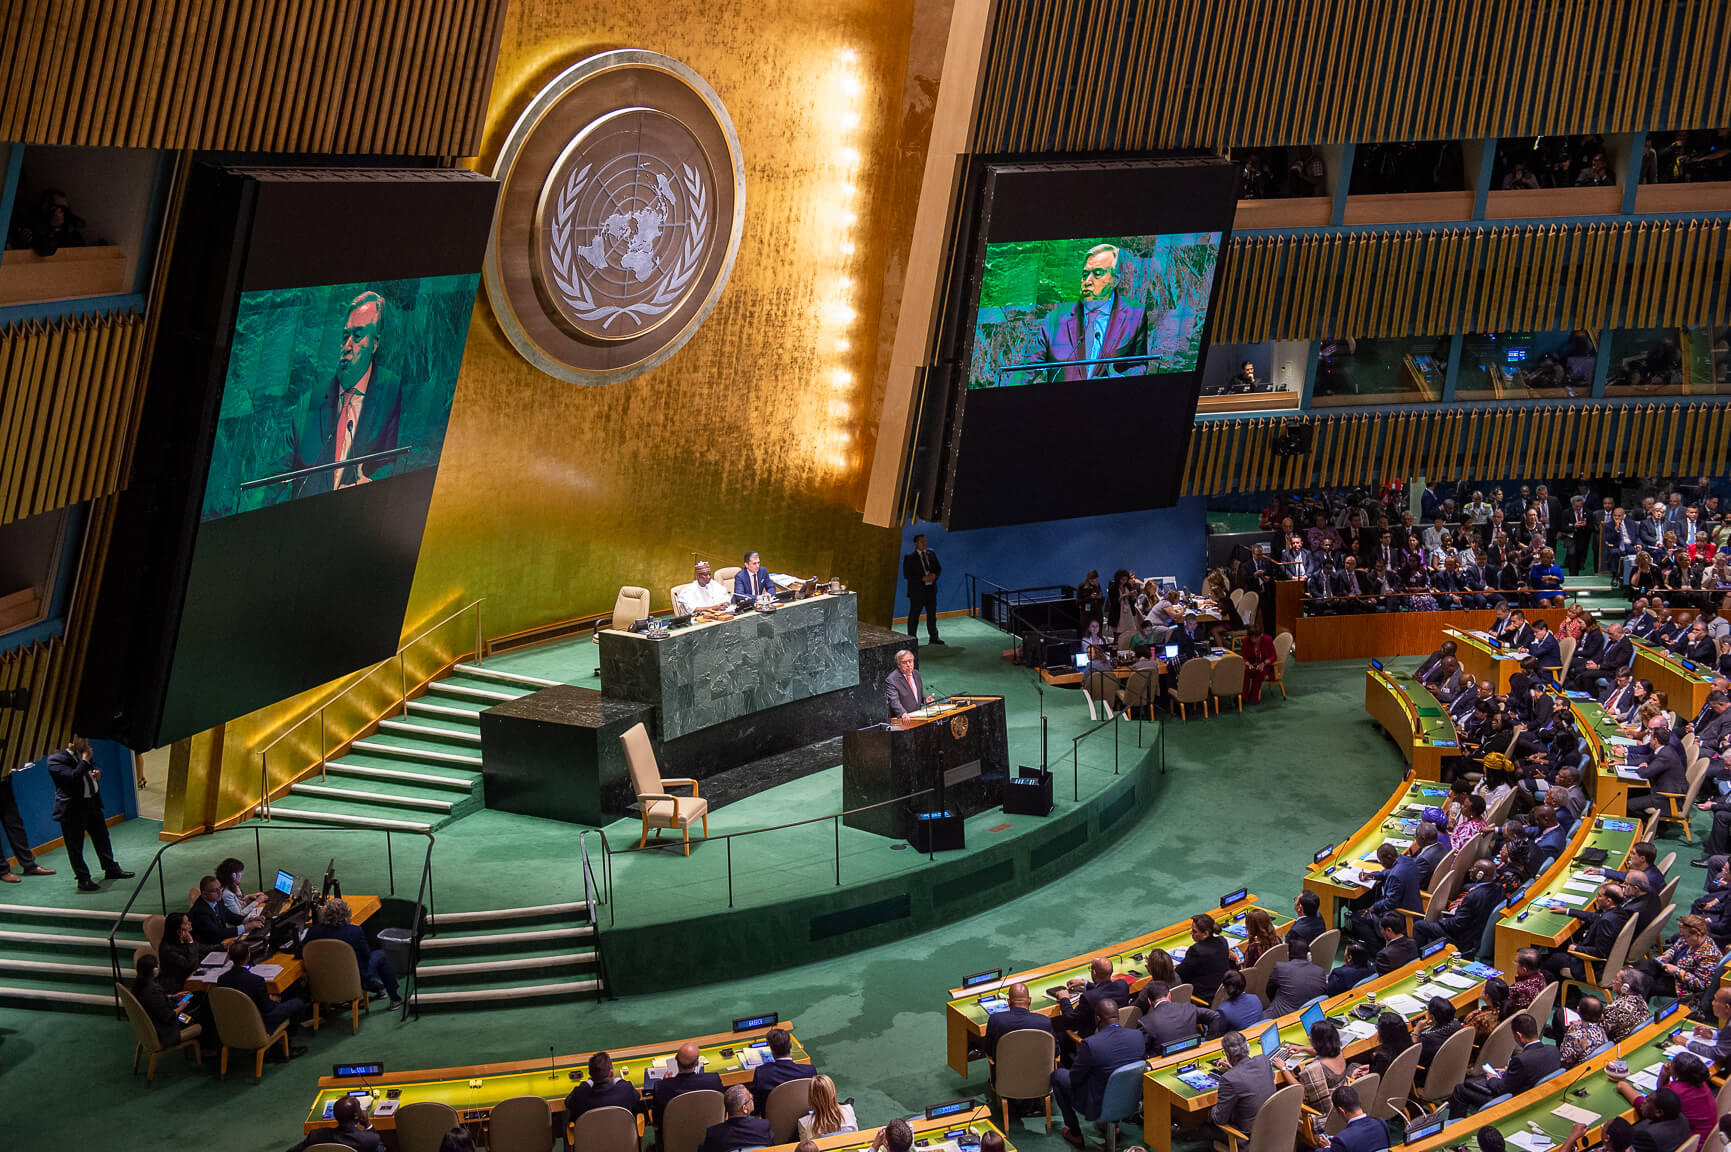 António Guterres, Secretary-General of the United Nations at the UN General Assembly in 2019. © NATO